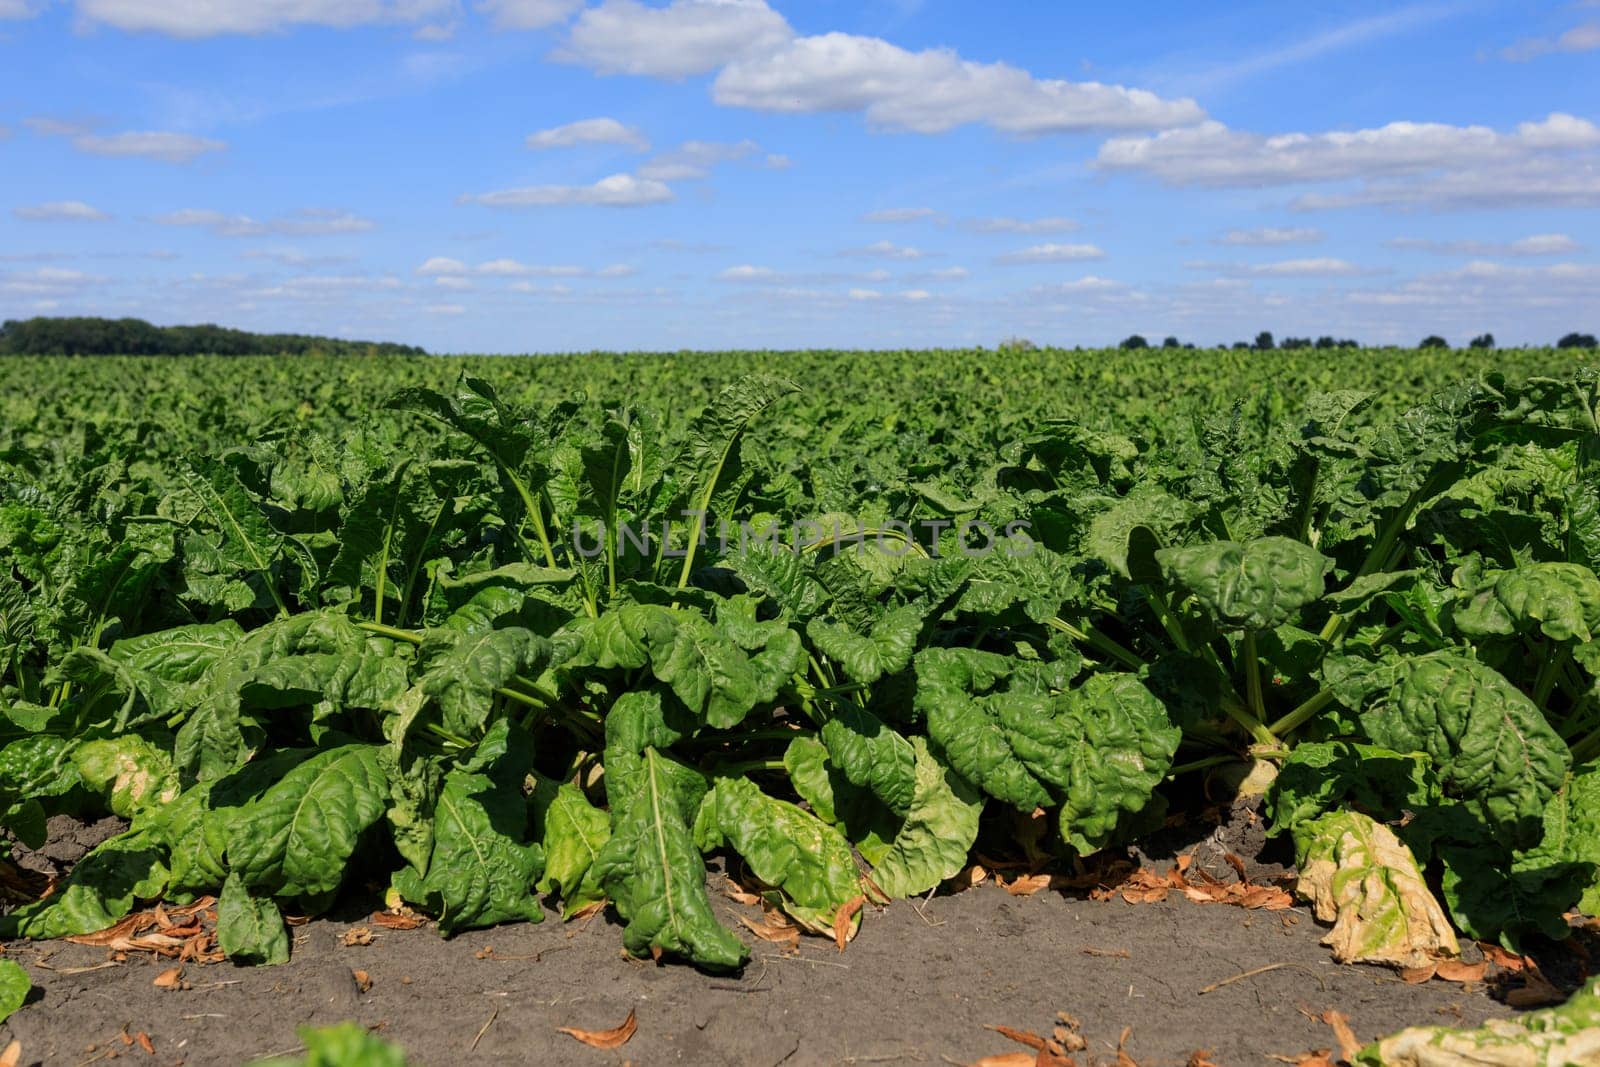 beet harvest in the field, blue sky. High quality photo